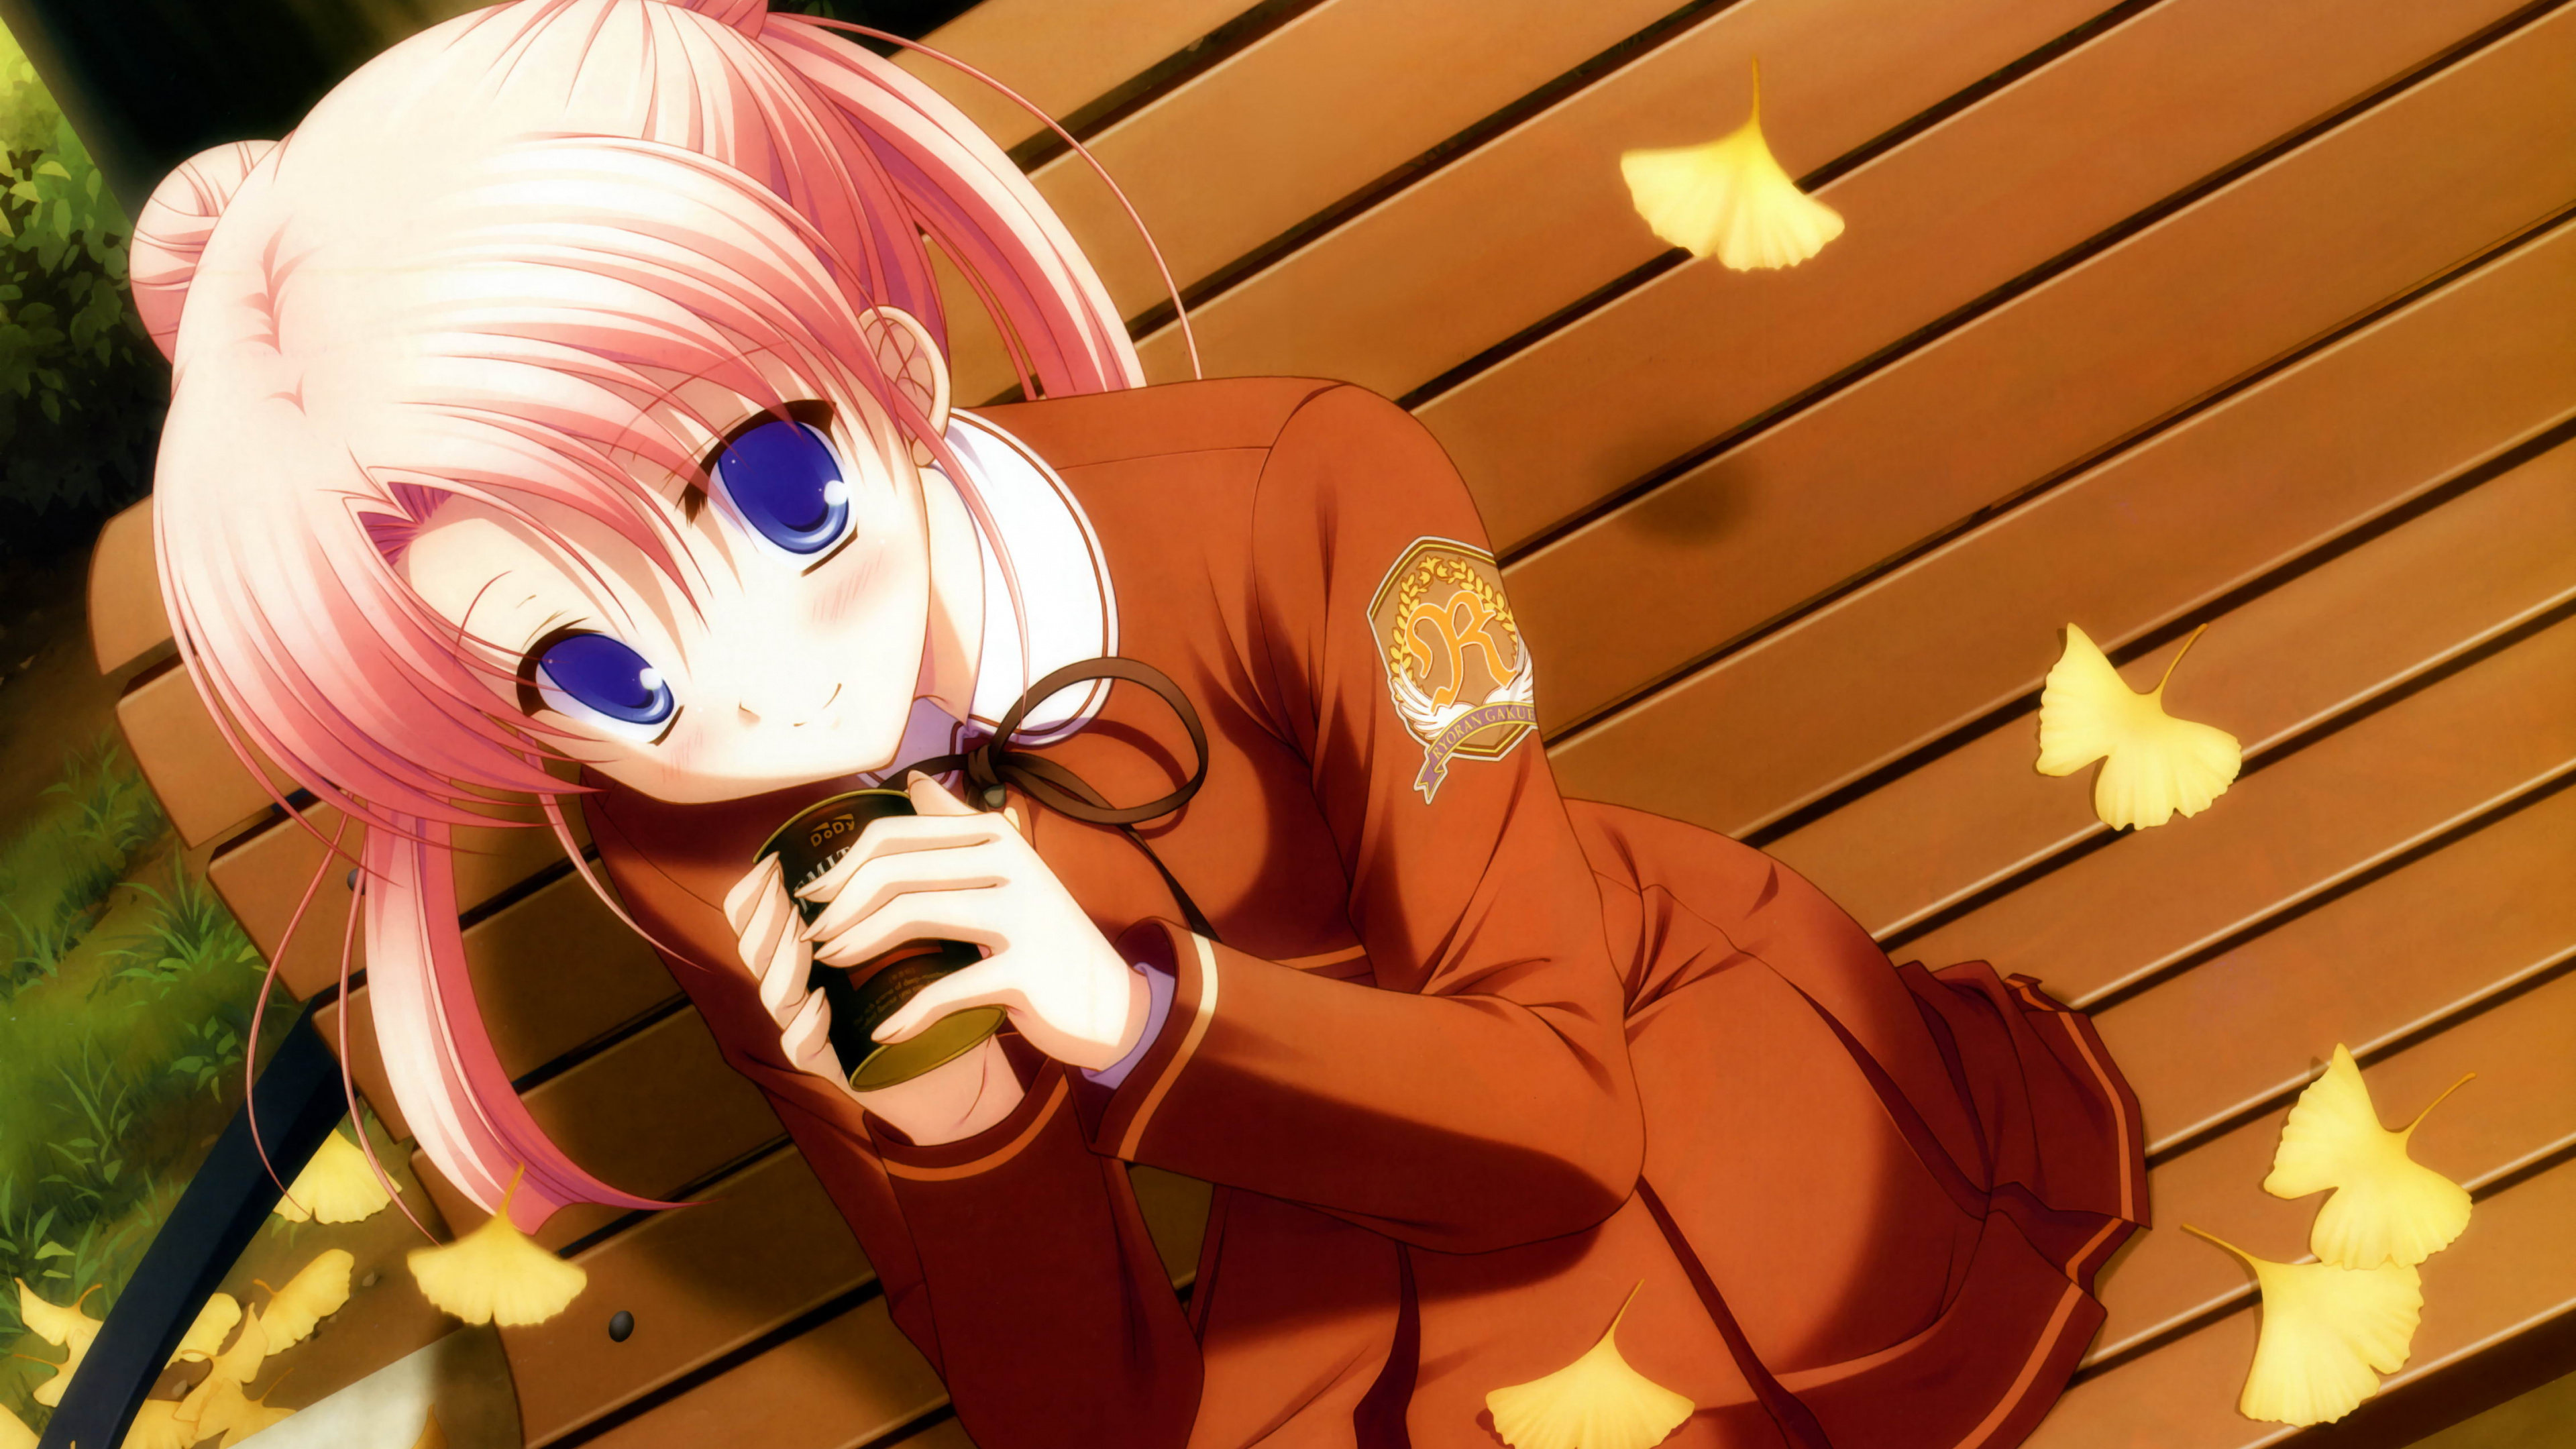 Girl in Brown Long Sleeve Shirt Anime Character. Wallpaper in 3840x2160 Resolution